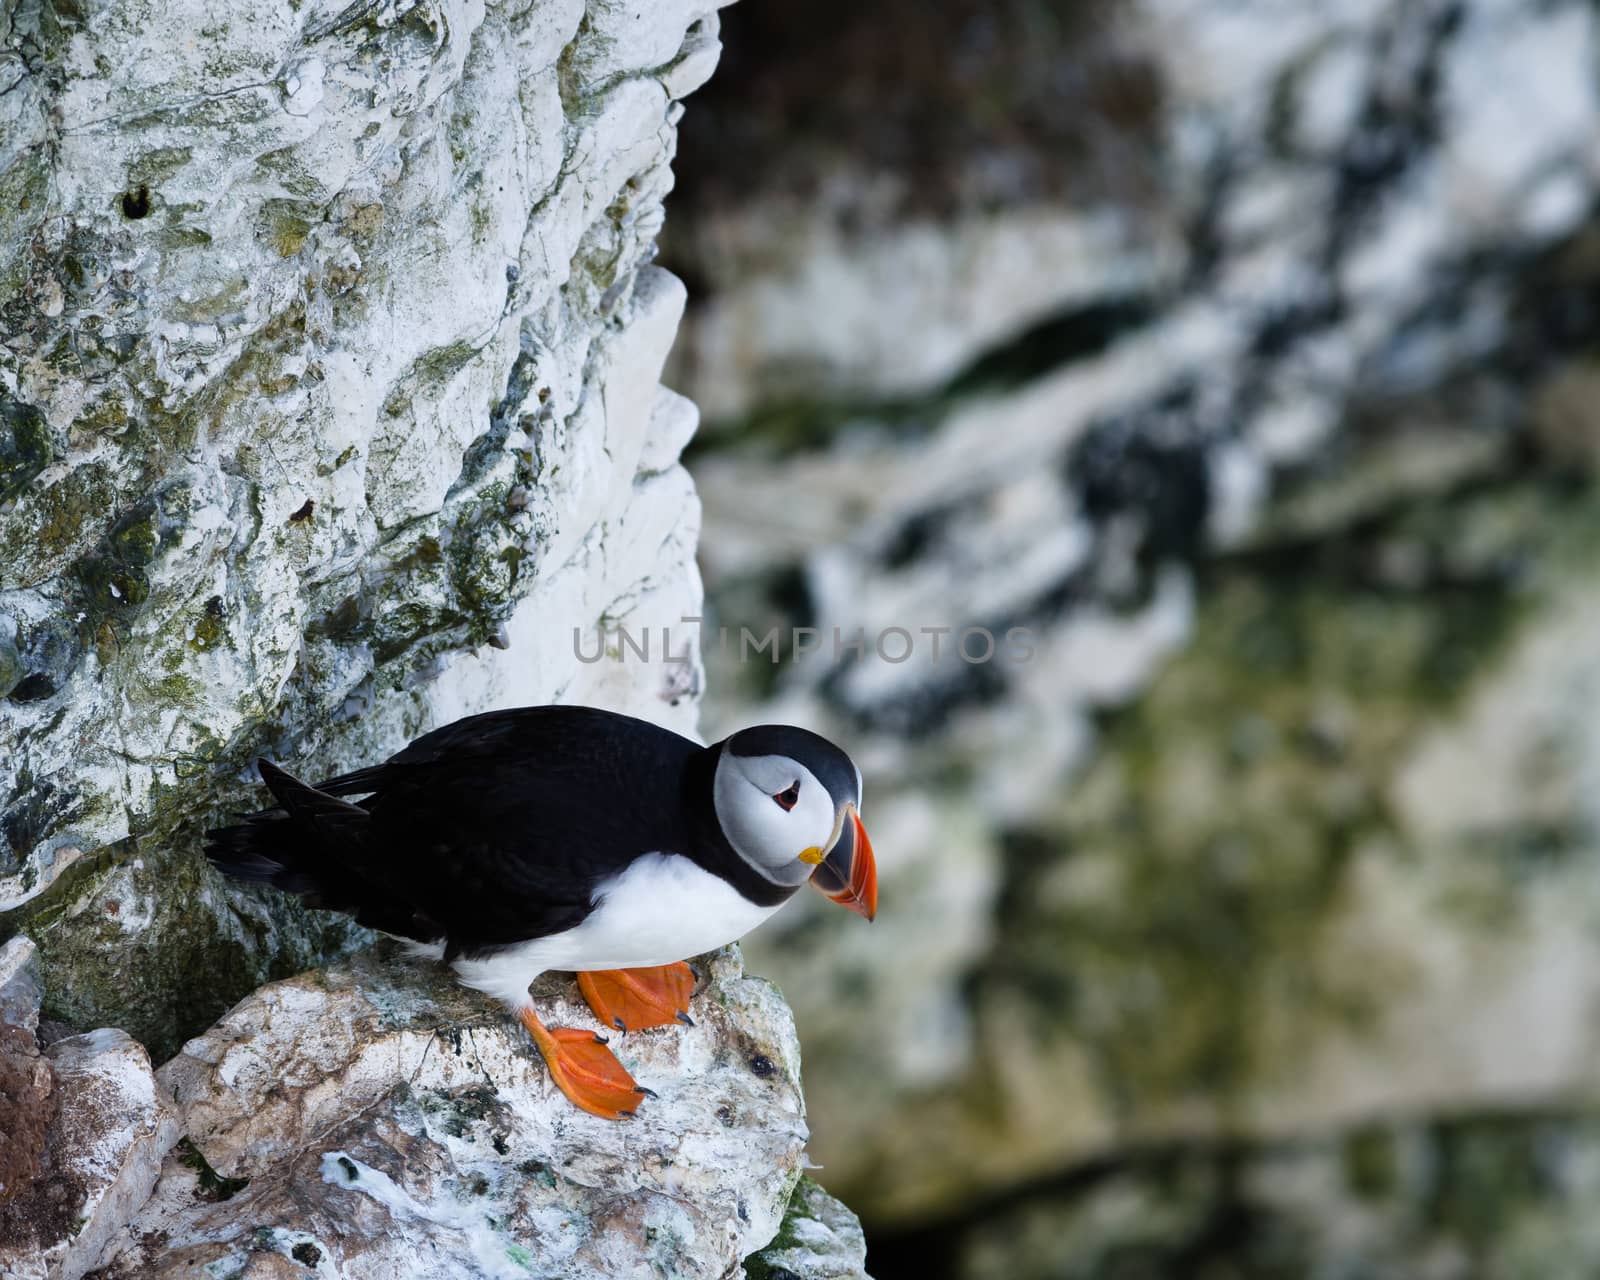 Puffins are any of three small species of alcids in the bird genus Fratercula with a brightly coloured beak during the breeding season. These are pelagic seabirds that feed primarily by diving in the water.